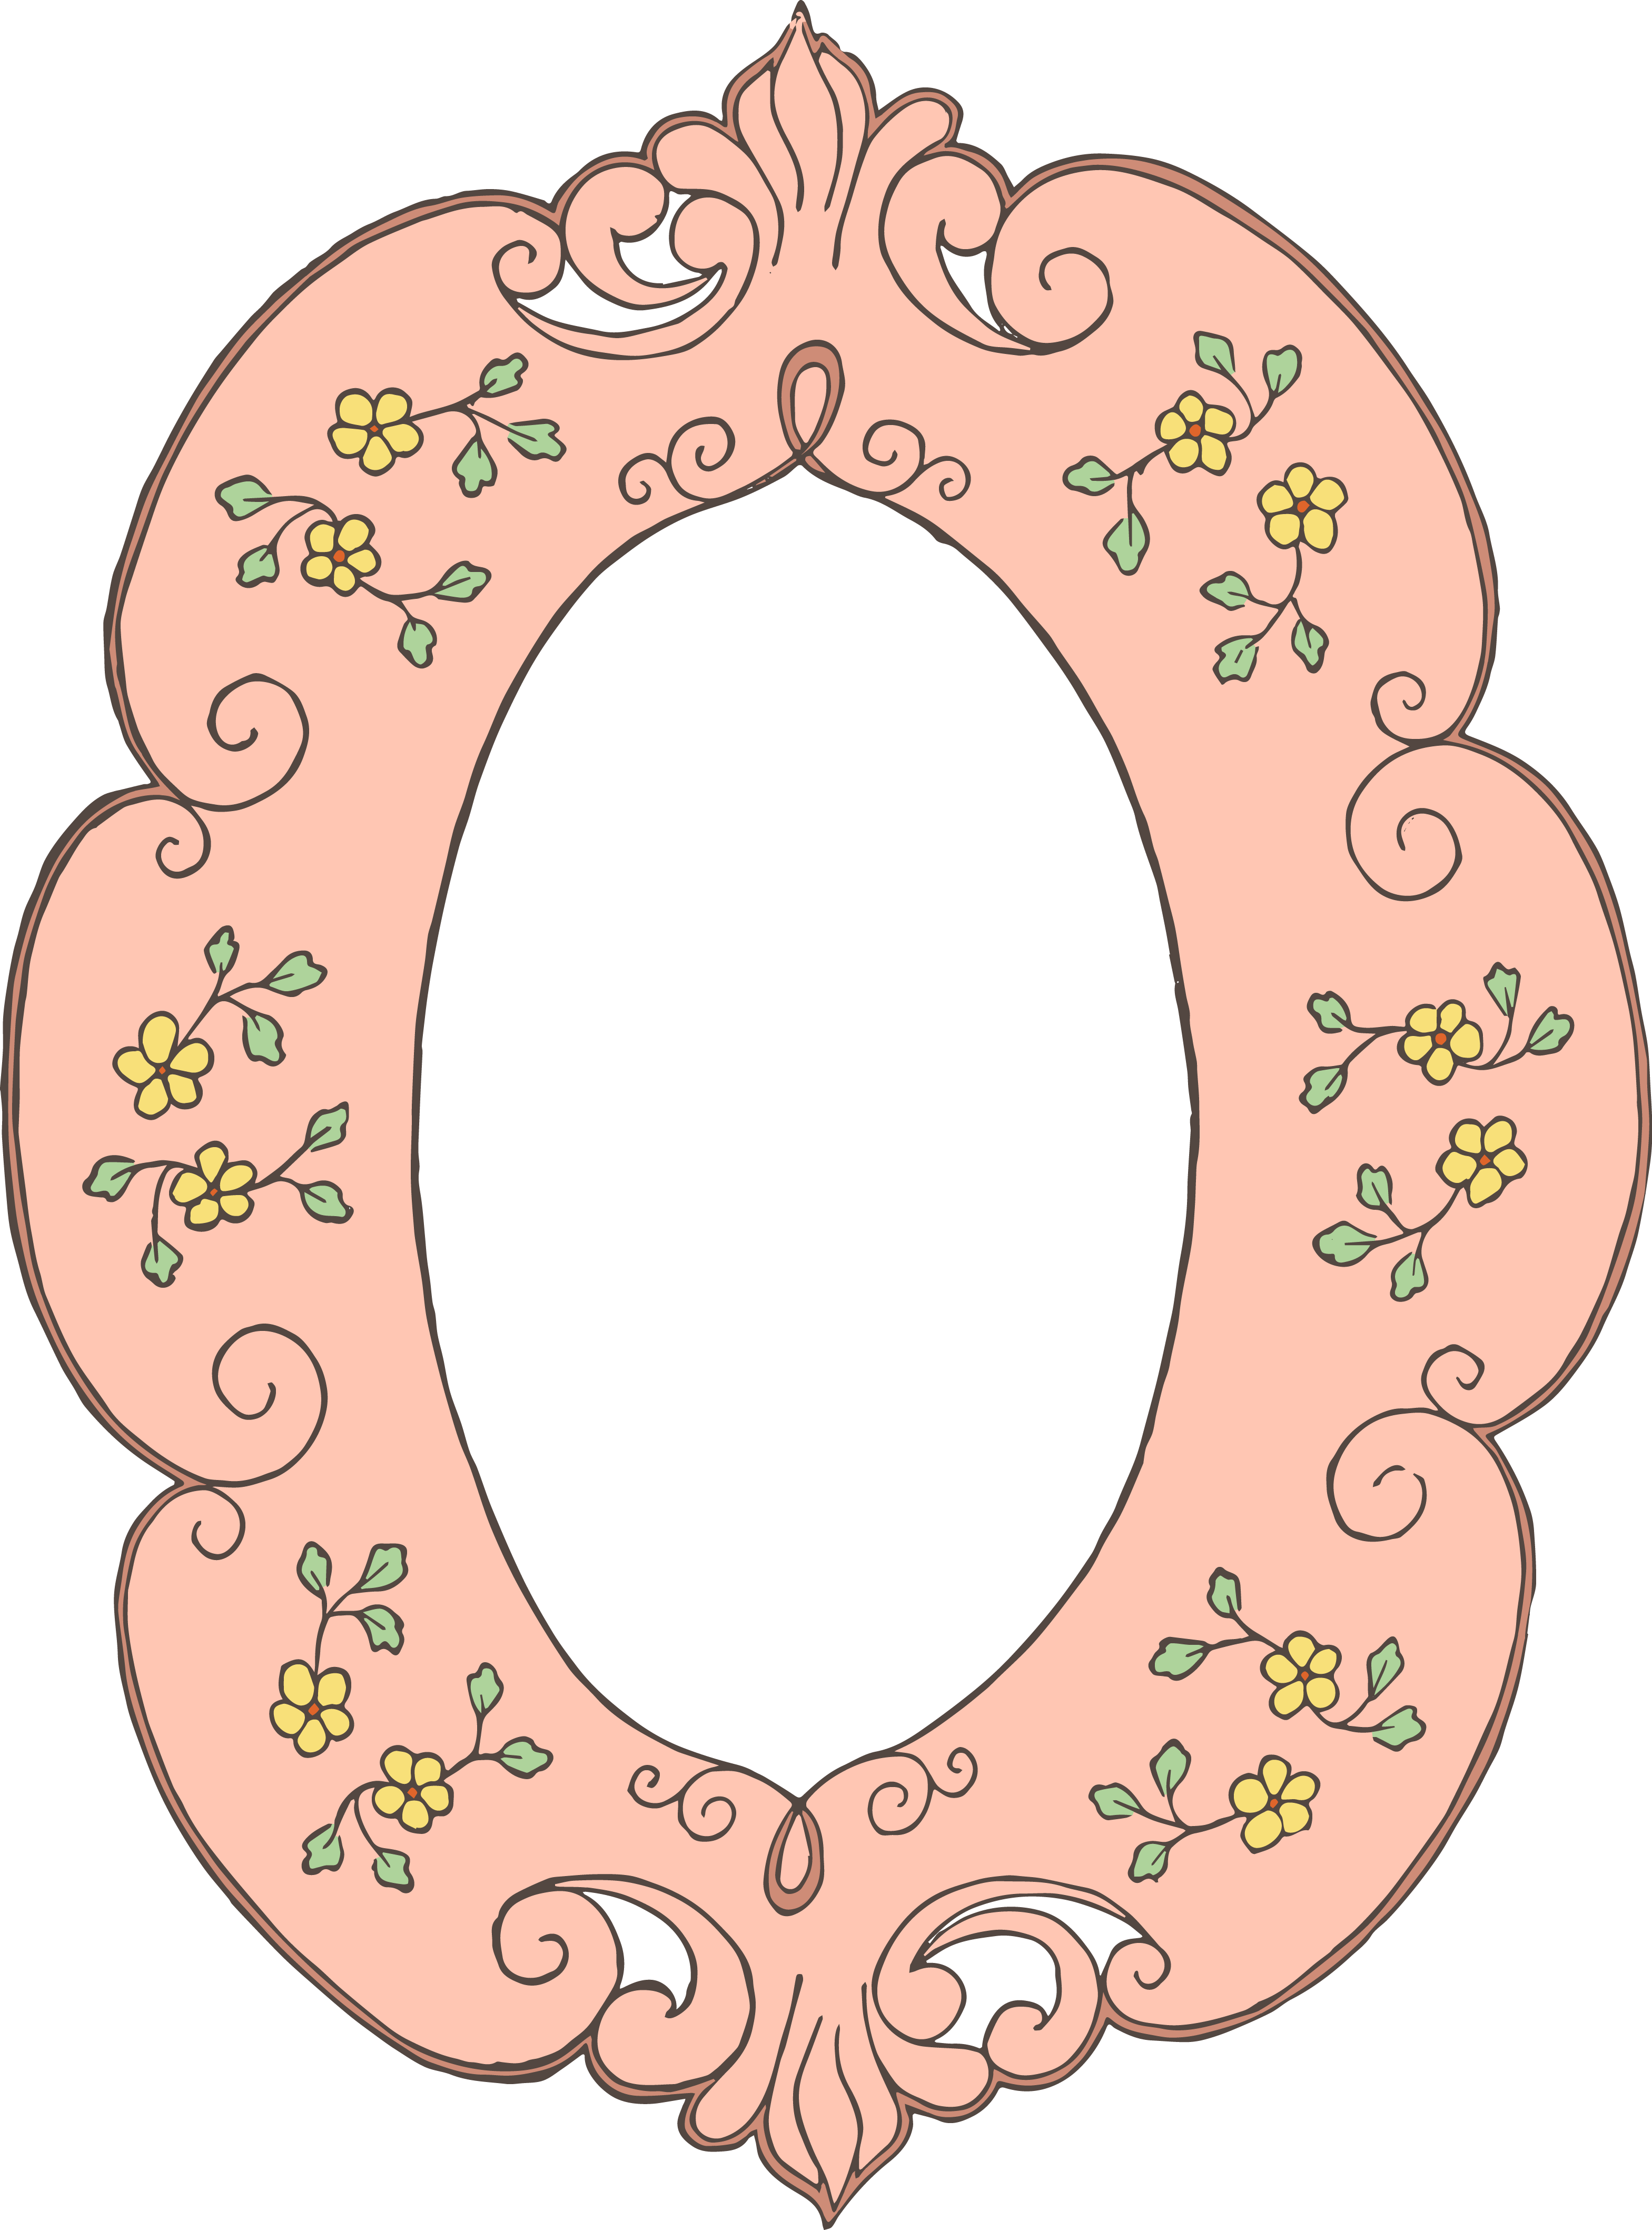 A Pink Oval Frame With Yellow Flowers And Swirls